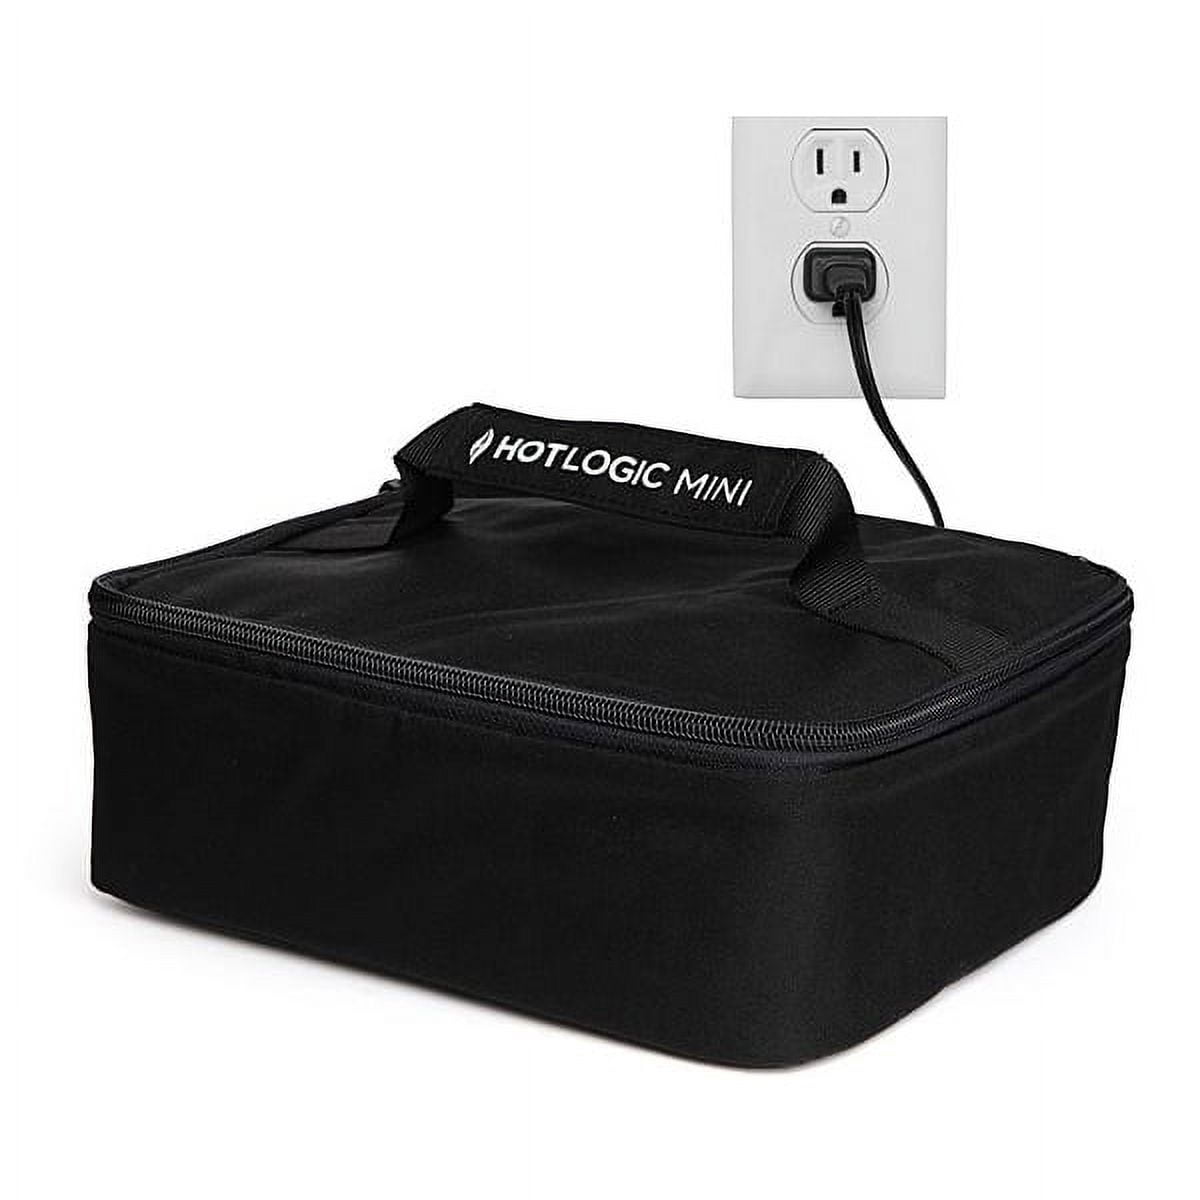 HotLogic Mini Portable Food Warmer for Home, Office, and Travel, Black 